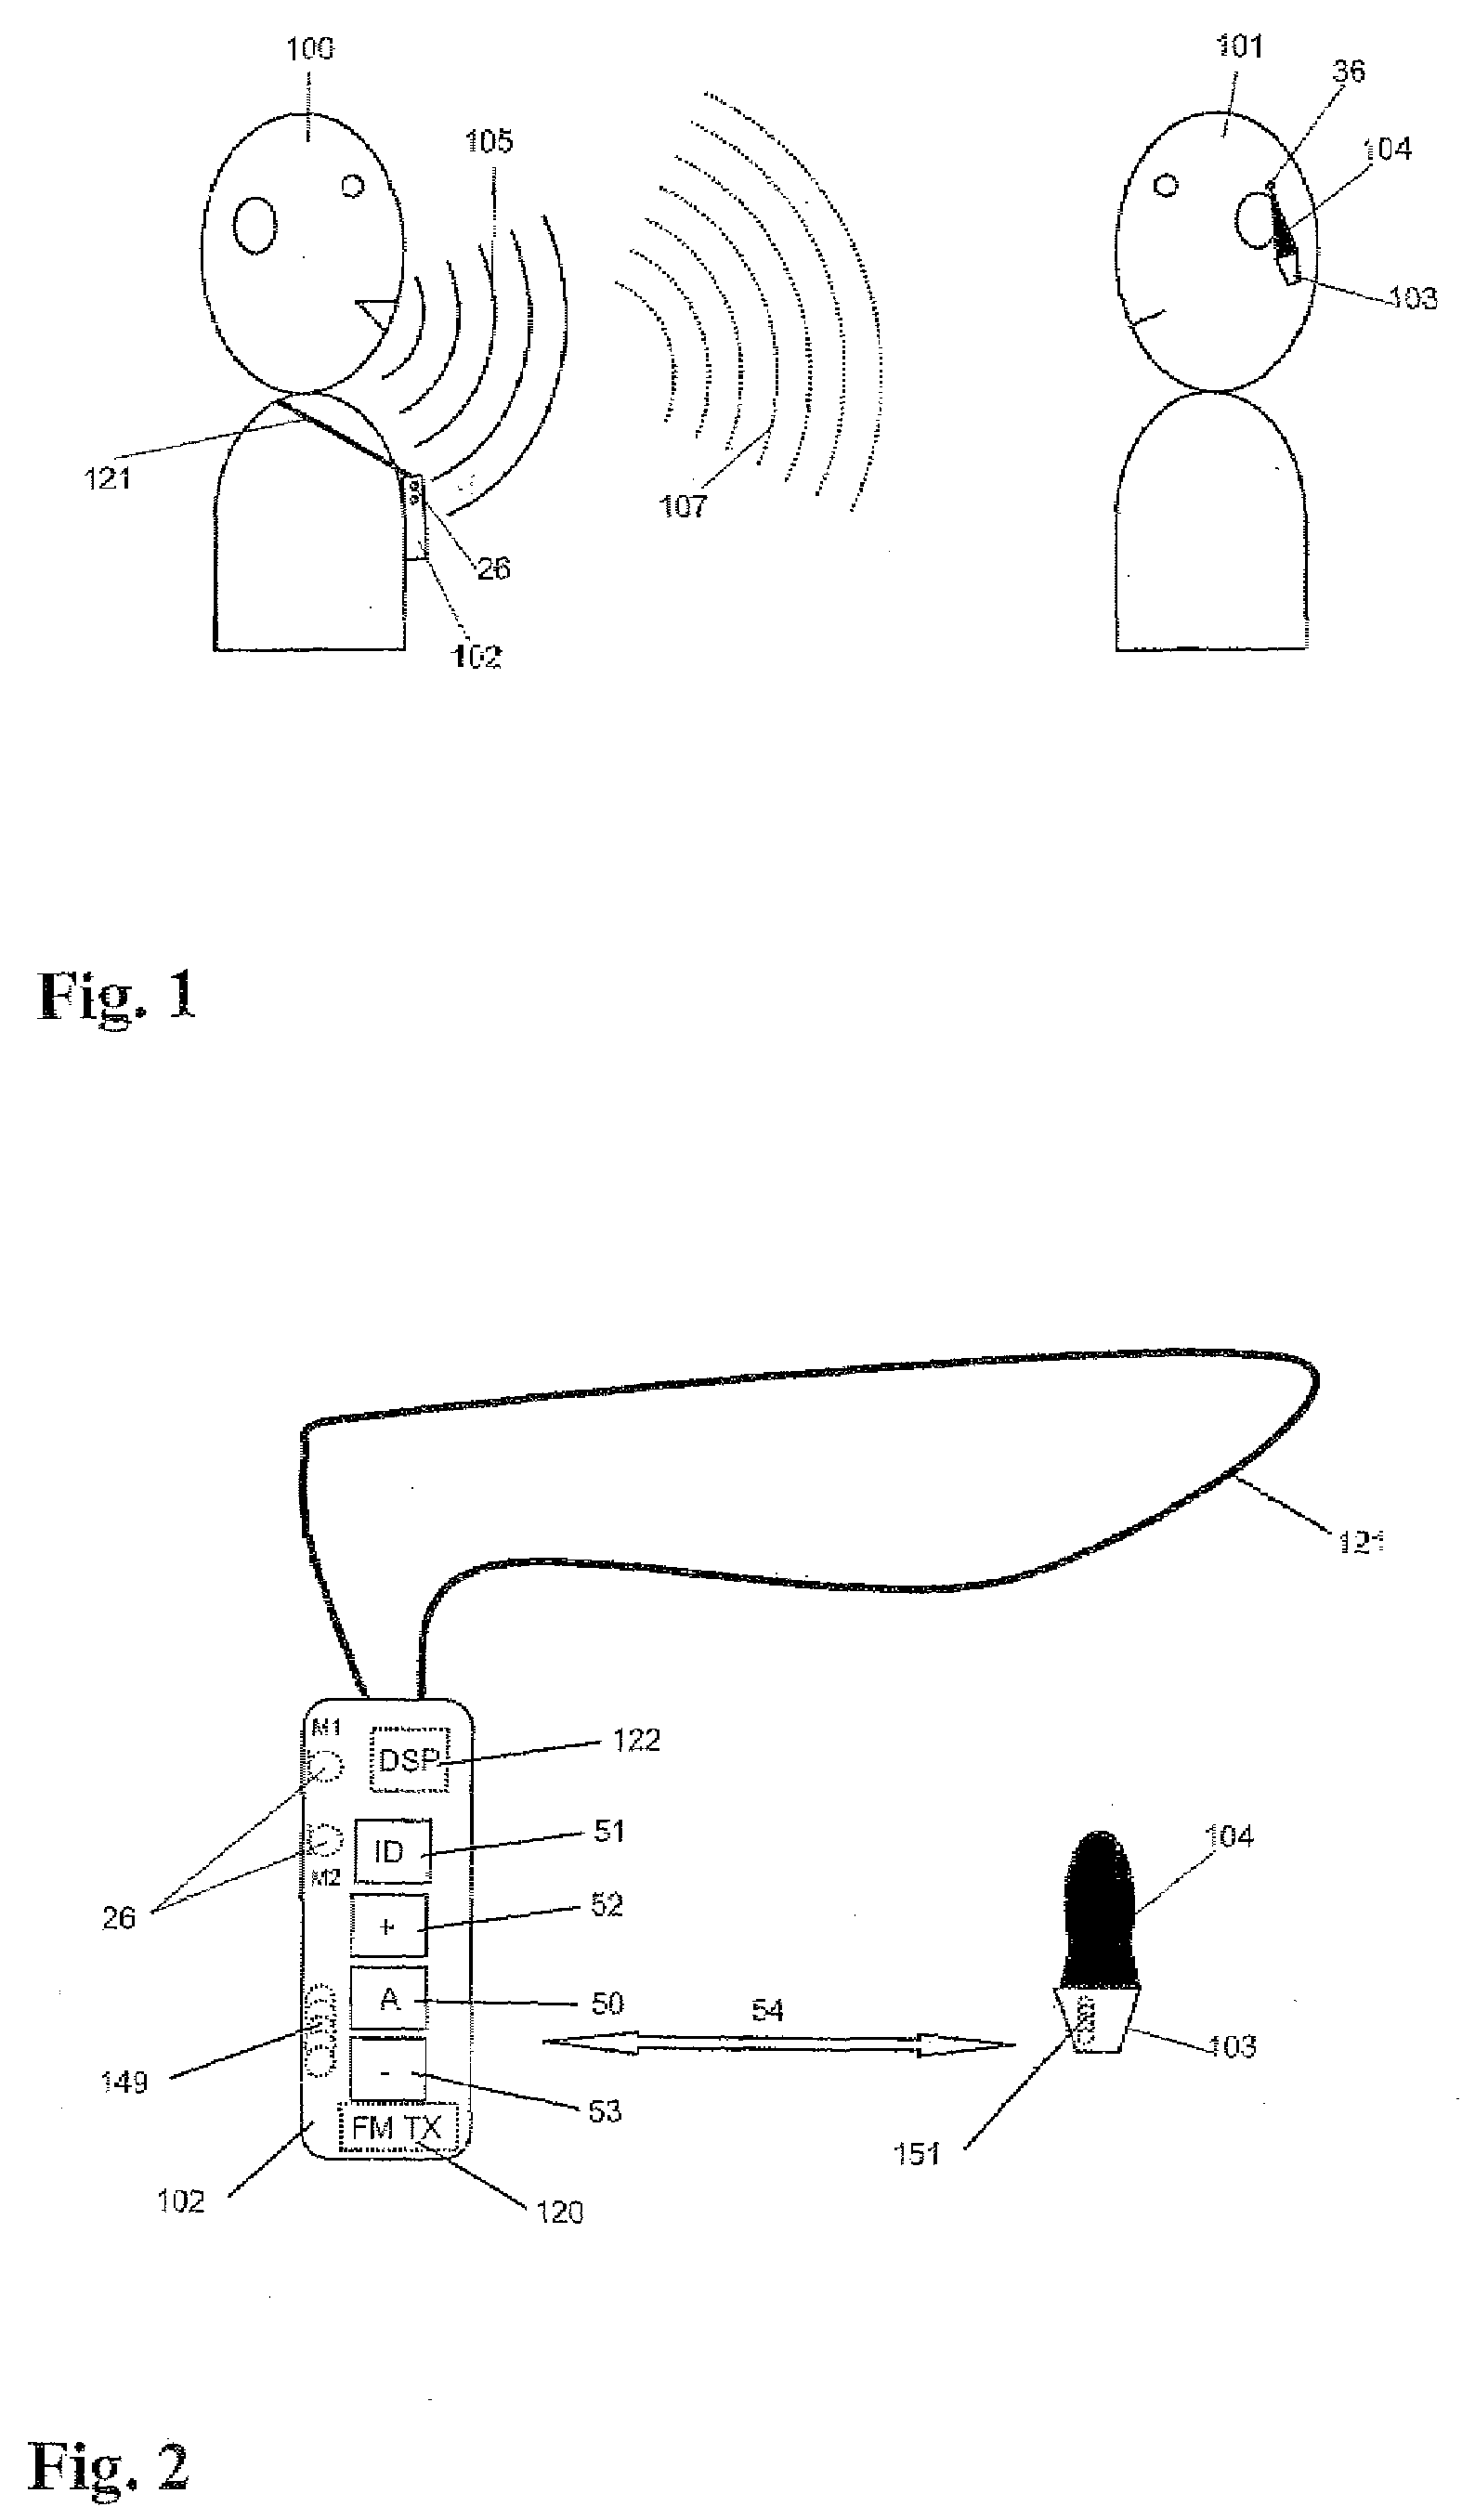 Method for adjusting a system for providing hearing assistance to a user